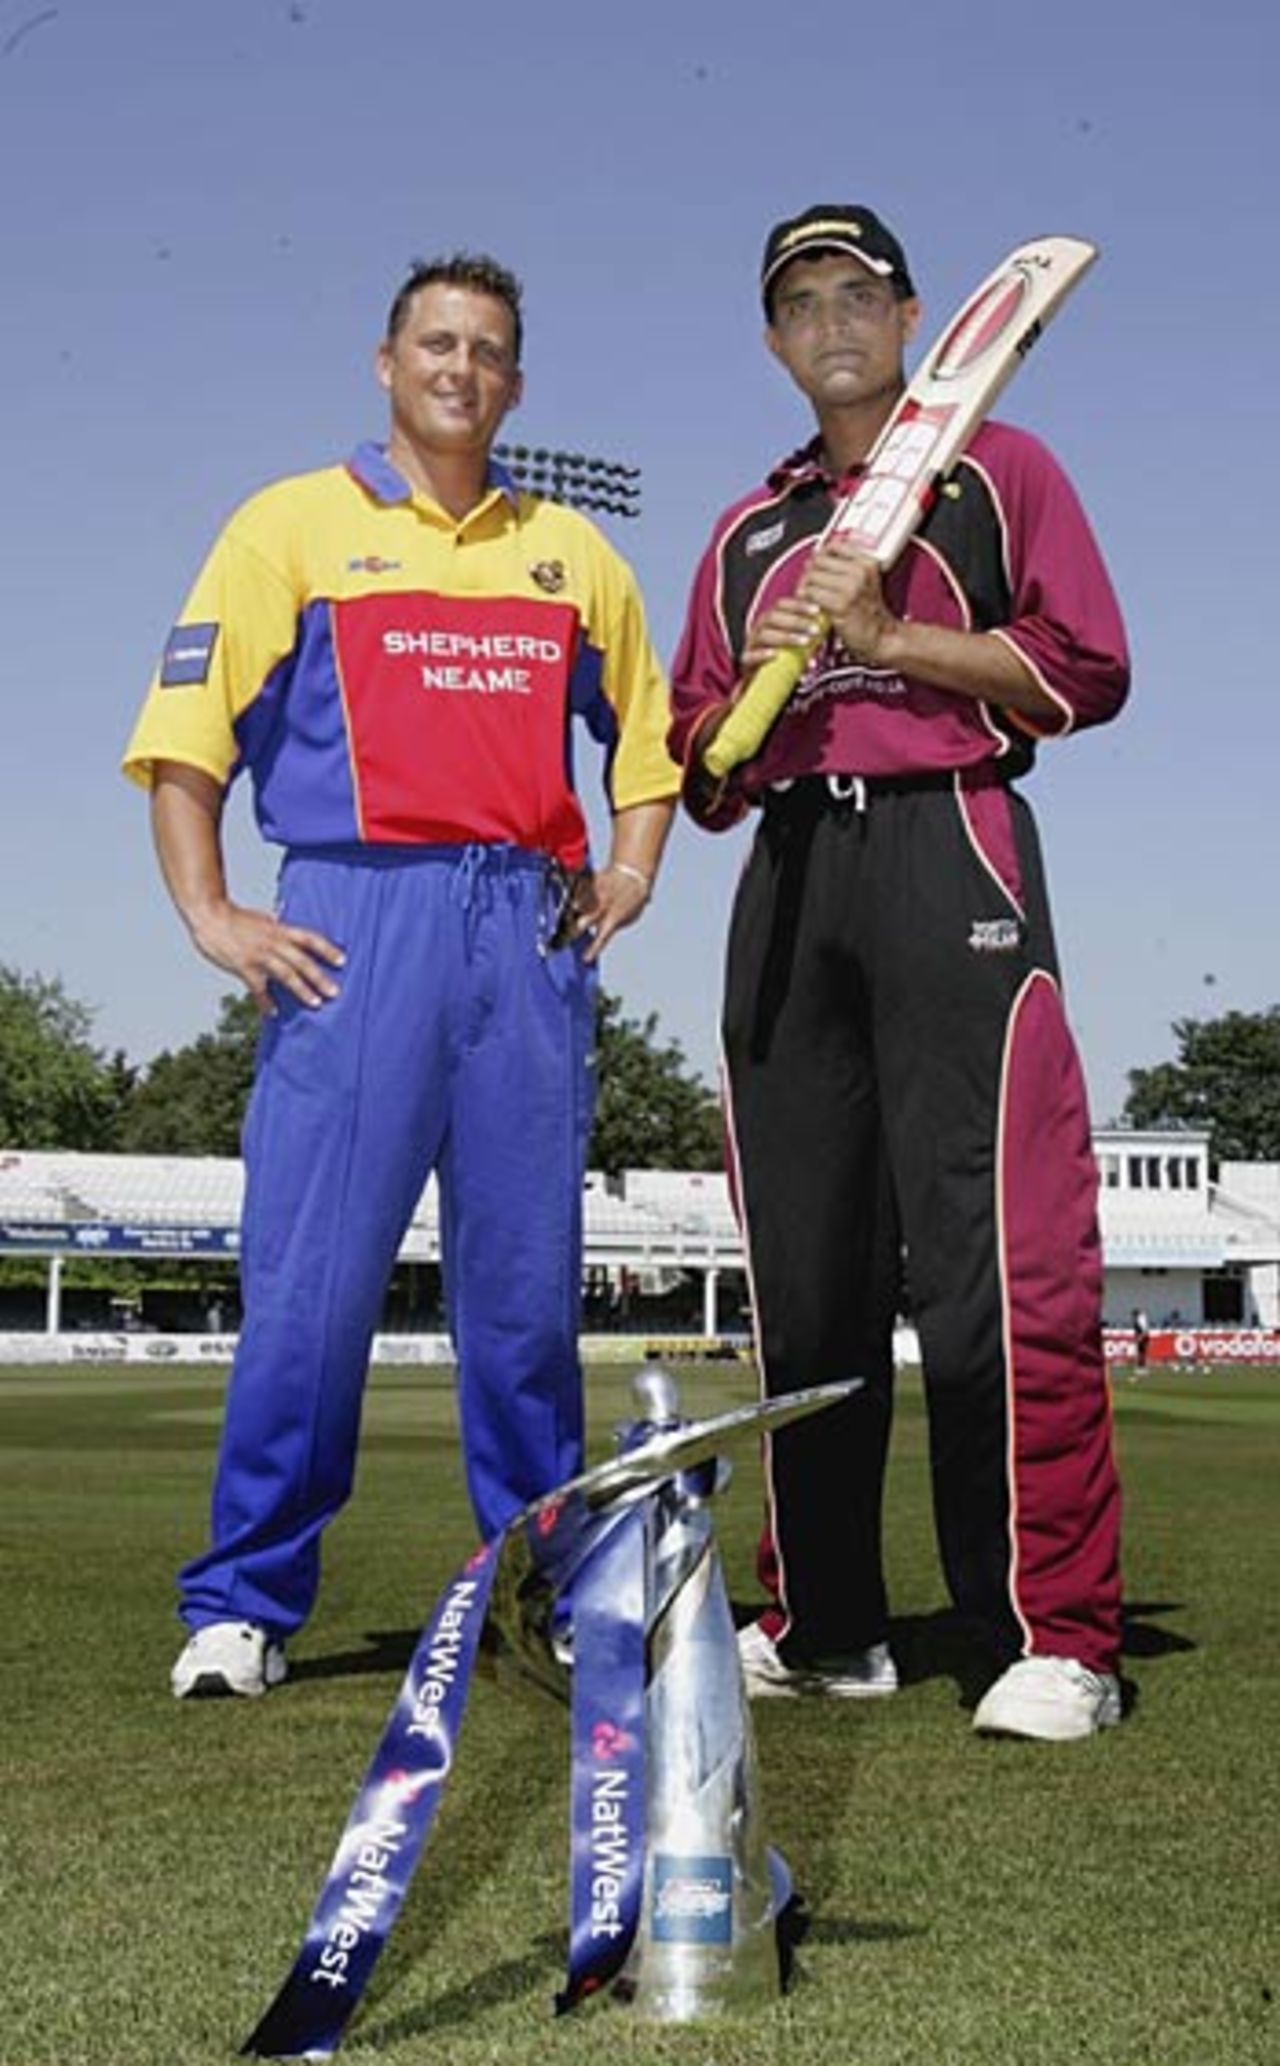 Darren Gough and Sourav Ganguly with the Pro40 trophy as the tournament is launched at Chelmsford, Essex v Northamptonshire, Pro40, Chelmsford, July 18, 2006